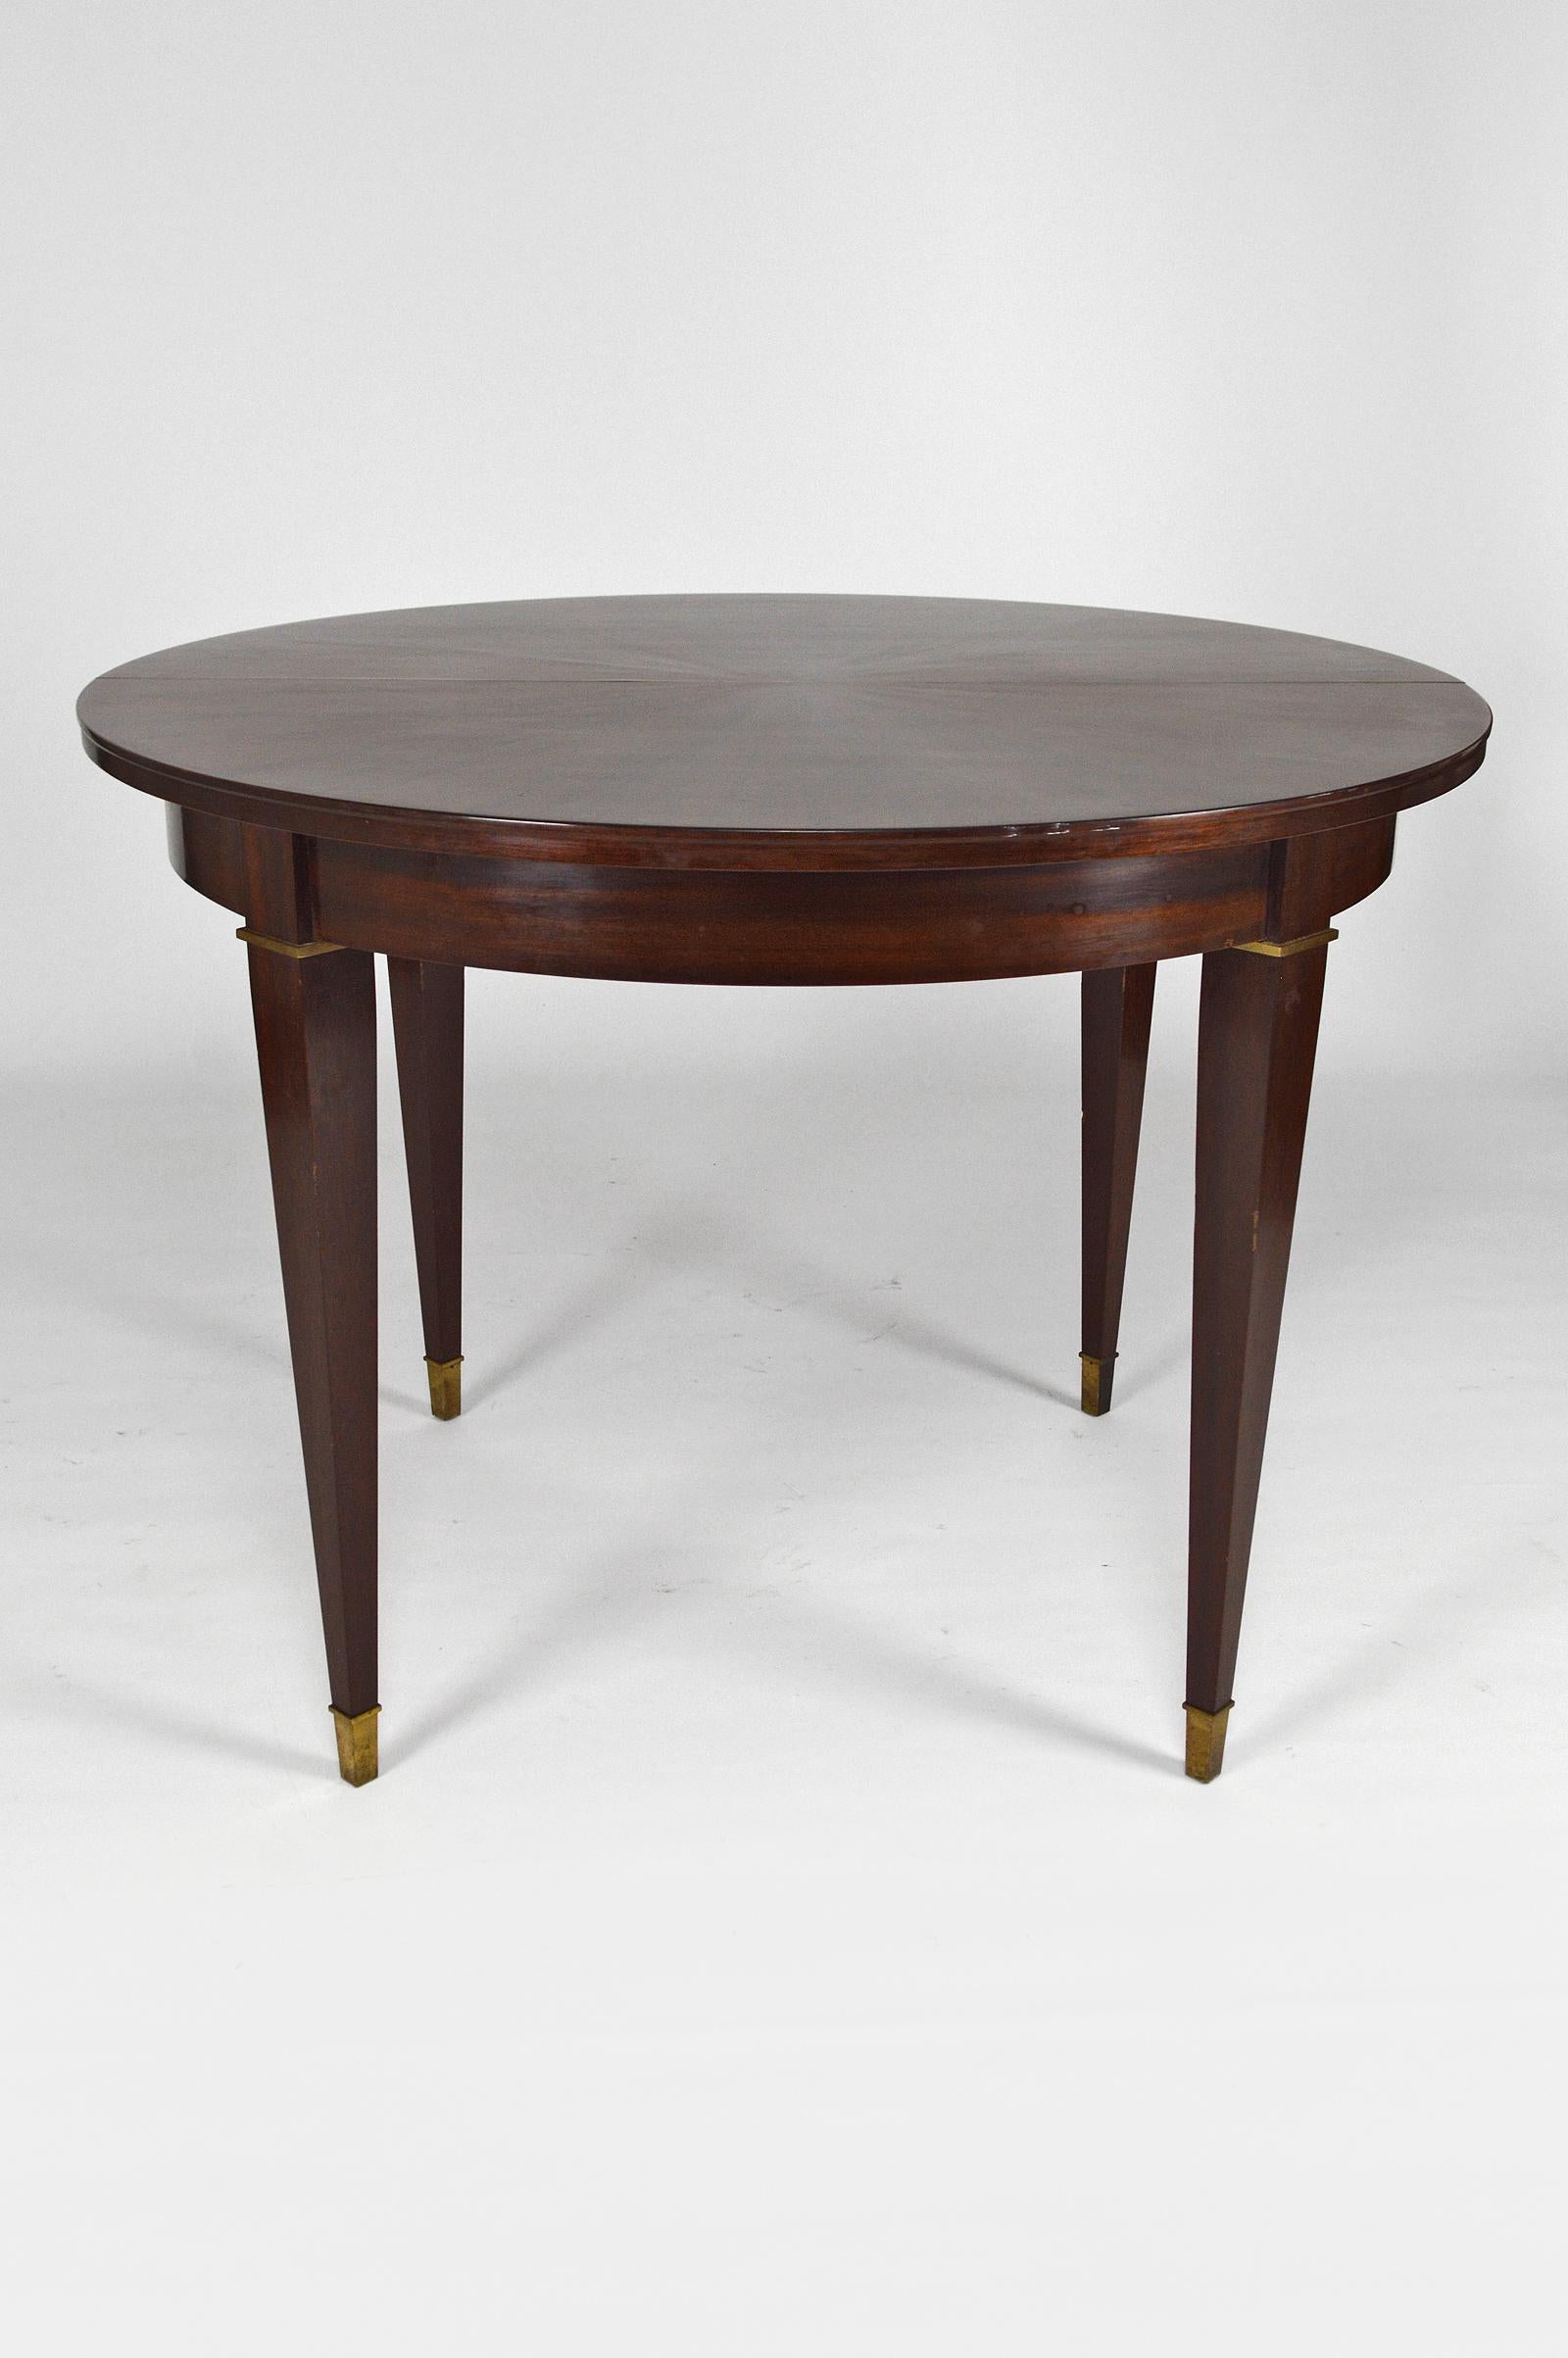 Beautiful round extendable dining table in solid and veneered mahogany. 

The table top is in veneered mahogany with a 